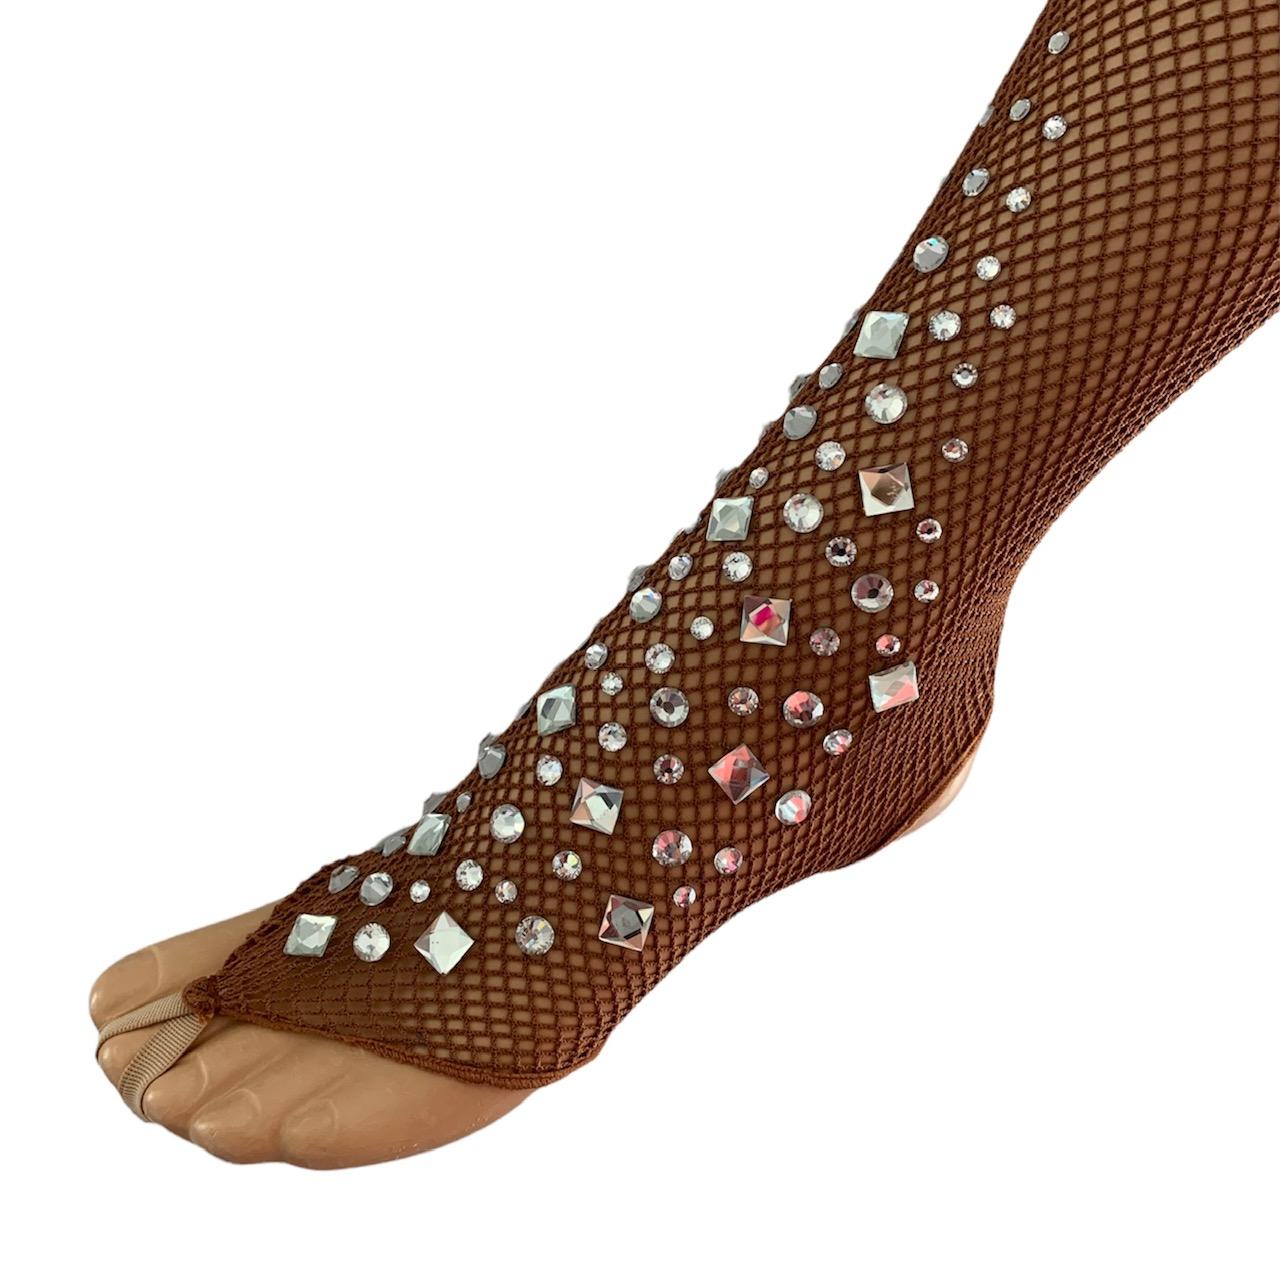 Collant resille avec strass elements sans pied profesionel dark toast caramel toffy gros plan danse spectacle strass2000